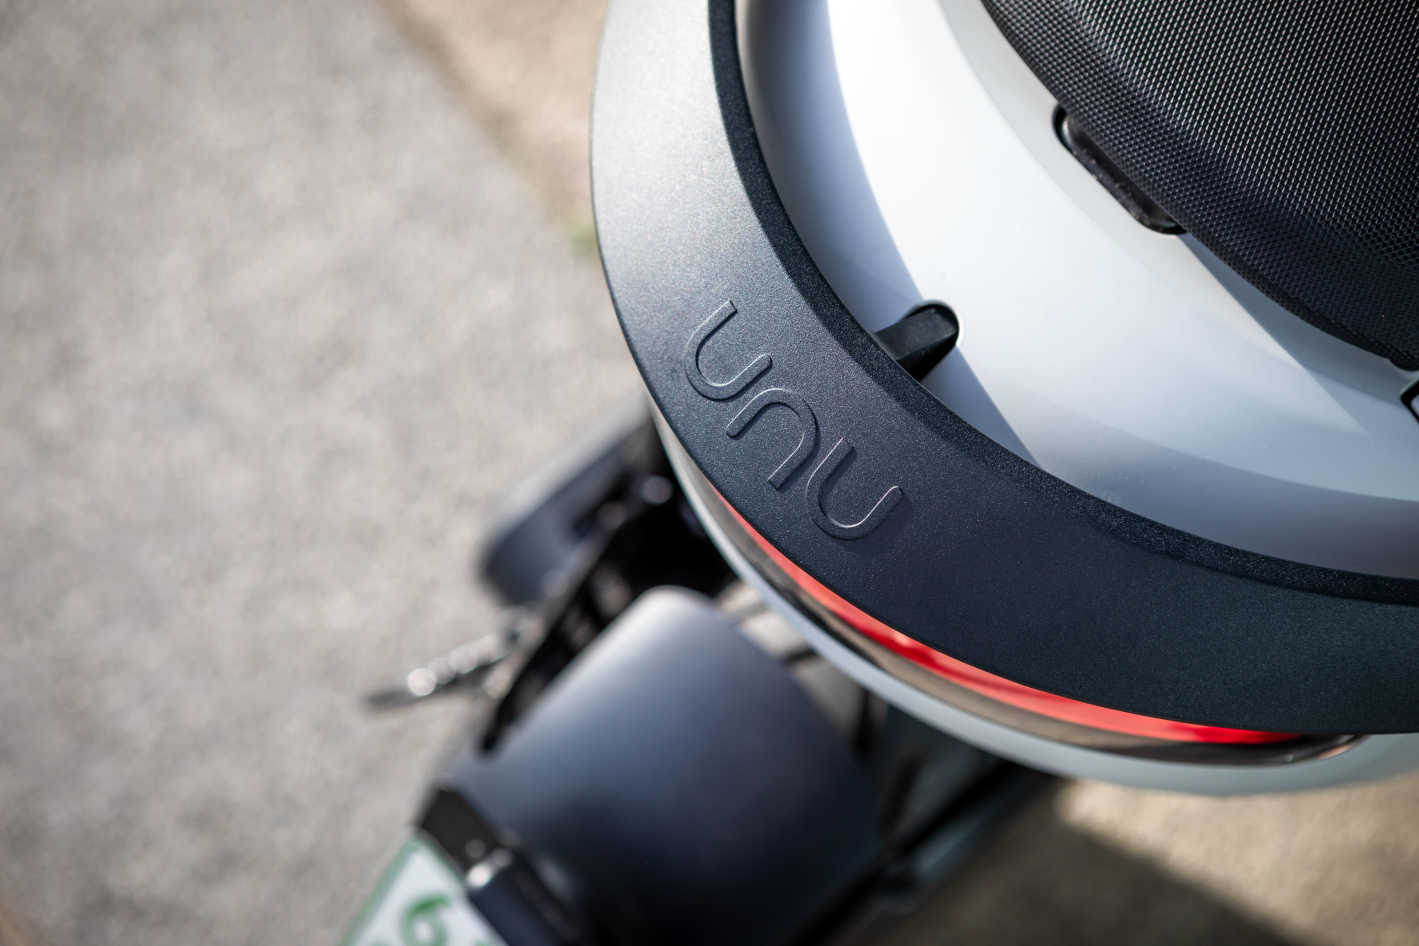 No matter if you choose a unu Move or unu Pro, both scooters are designed in the unique unu style. Become part of the unu community, with more than a thousand unu riders already on Europe's roads.